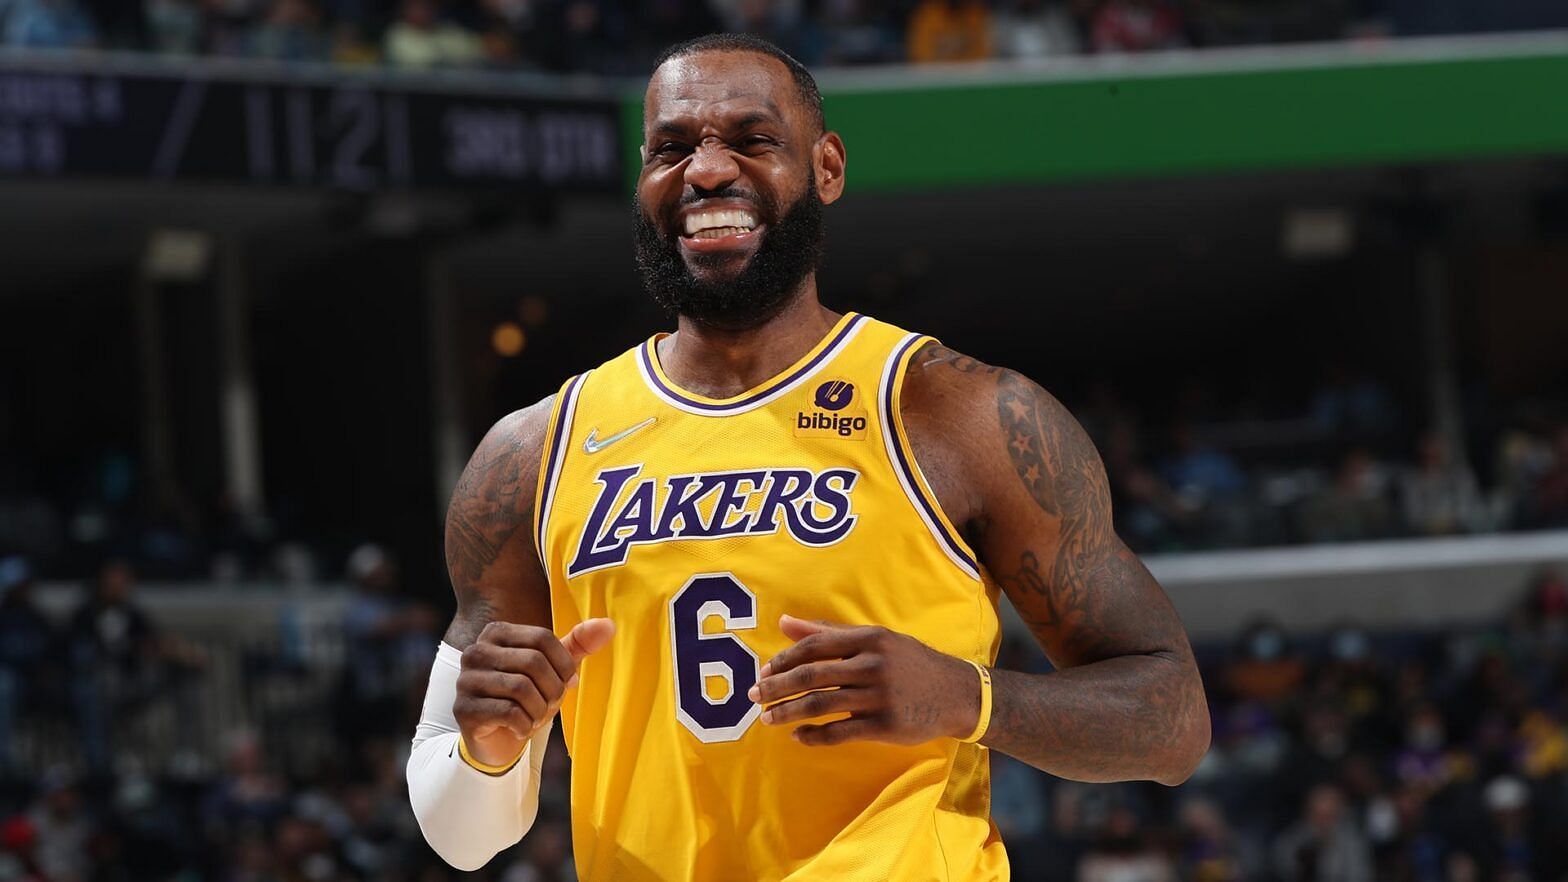 Los Angeles Lakers superstar LeBron James comments on Russell Westbrook